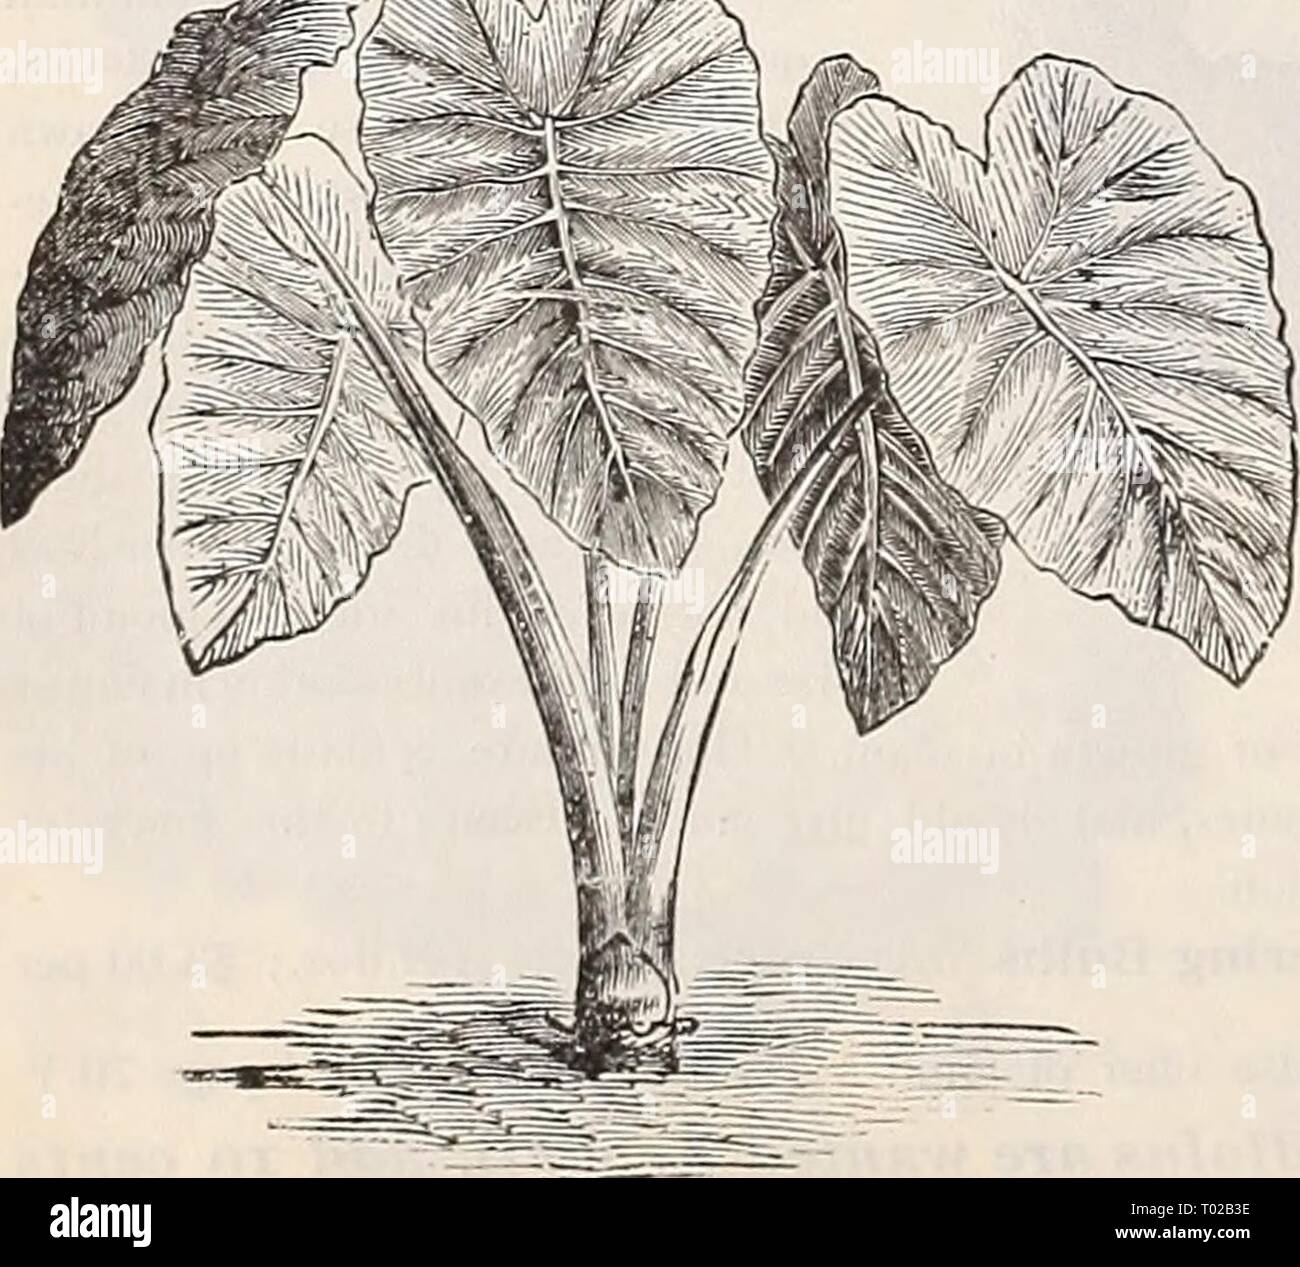 Dreer's garden calendar : 1899 . dreersgardencale1899henr Year: 1899  A^    Cai.adium Kscdlentum. Amaryllis. CINNAMON INE. (Dioscorea Batatas, i A rapid growing climber, taking its name from the peculiar fragrance of the delicate white flowers. The leaves are heart-shaped. bright glossy-green; growth is very rapid, reaching about R feet in height ; quite hardy. Good roots, 5 cts. each ; 50 cts. per doz. HYACINTHUS CANDICANS. (Cape Hyacinth. | A snow-white Summer flowering Hyacinth, growing 3 to 5 feet in height. gracefully surmounted with from 20 to 30 pure white bell-shaped flowers. 5 cts. e Stock Photo